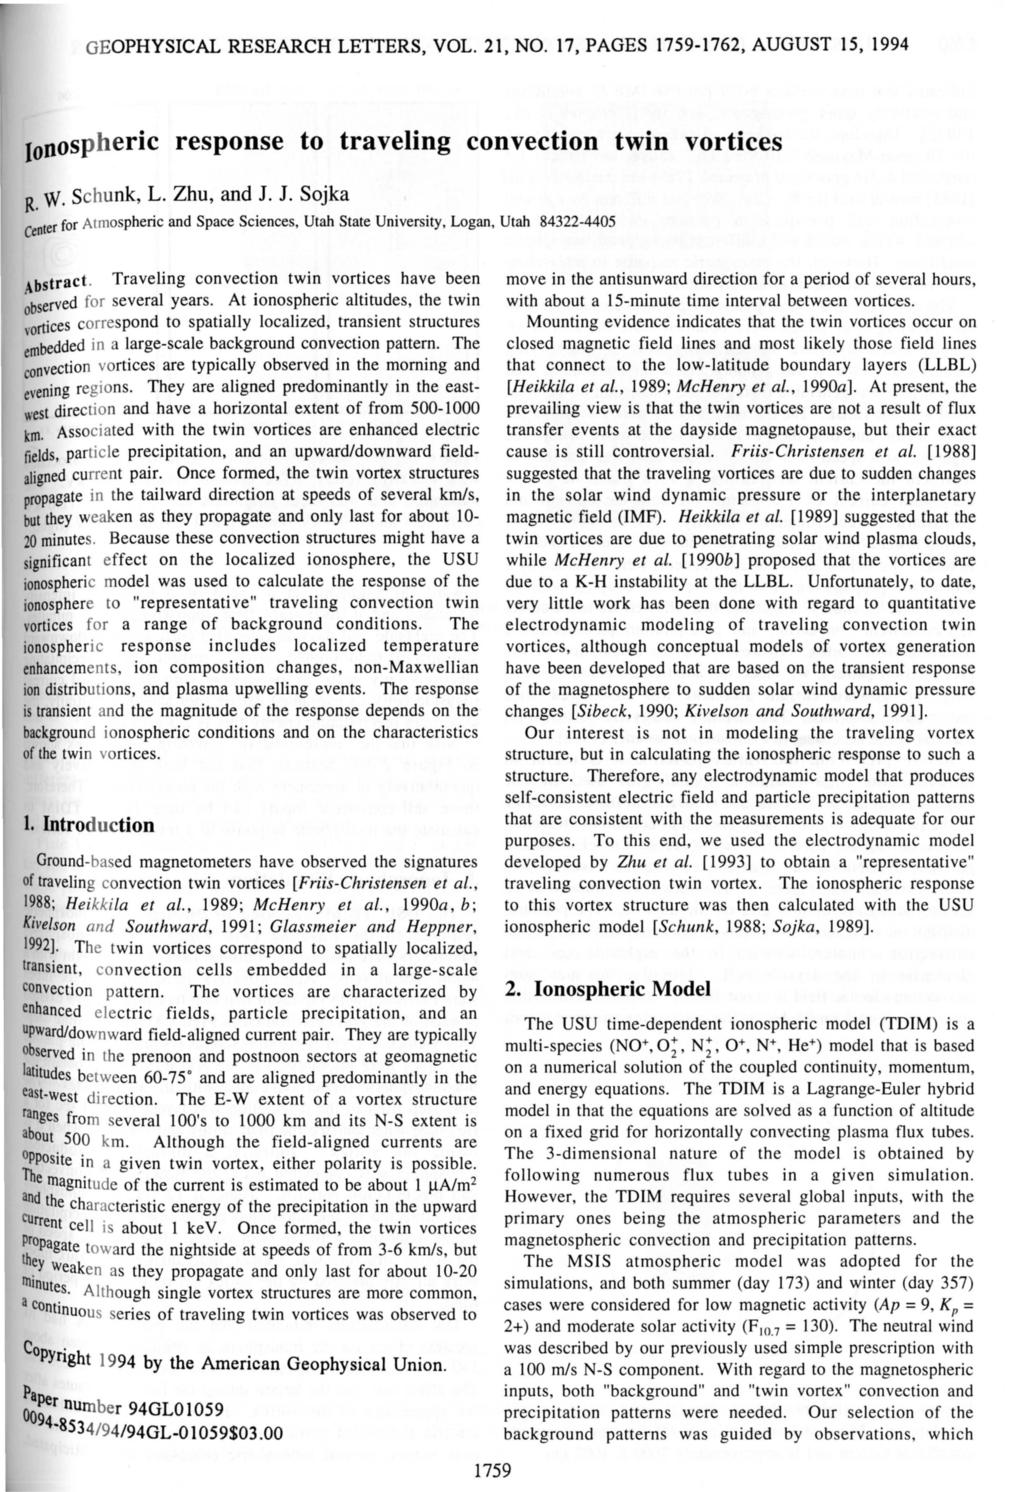 GEOPHYSCAL RESEARCH LETTERS, VOL. 21, NO. 17, PAGES 1759-1762, AUGUST 15,1994 Jon os heric response to traveling convection twin vortices t W. Schunk, L. Zhu, and J. J. Sojka Center for Atmo pheric and Space Sciences,, Logan, Utah 84322-4405 Abstract.